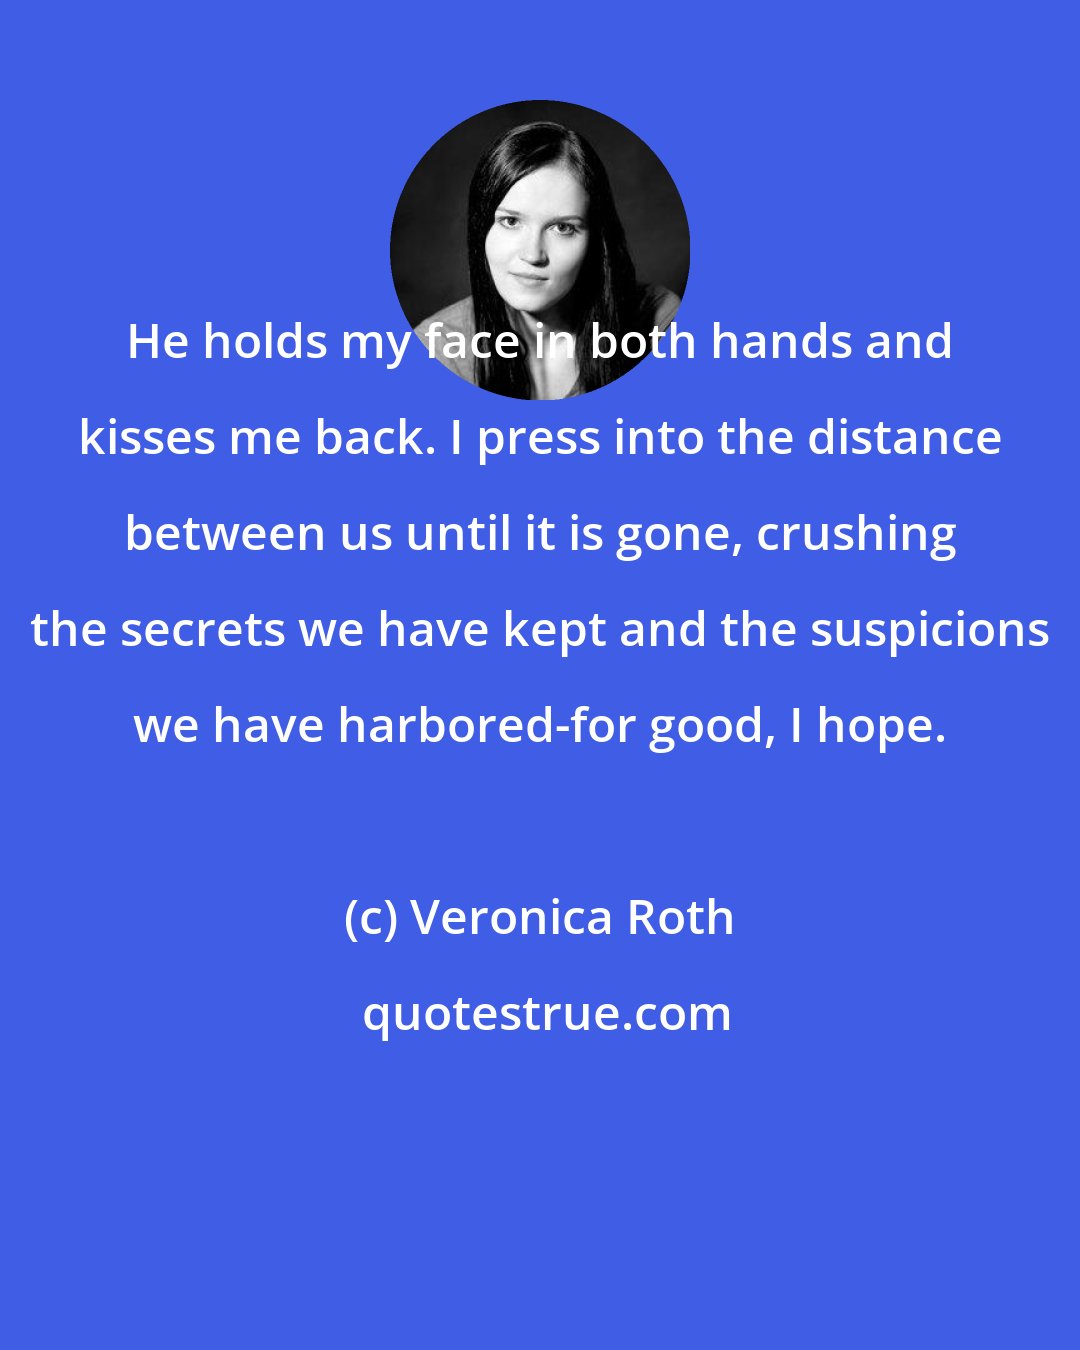 Veronica Roth: He holds my face in both hands and kisses me back. I press into the distance between us until it is gone, crushing the secrets we have kept and the suspicions we have harbored-for good, I hope.